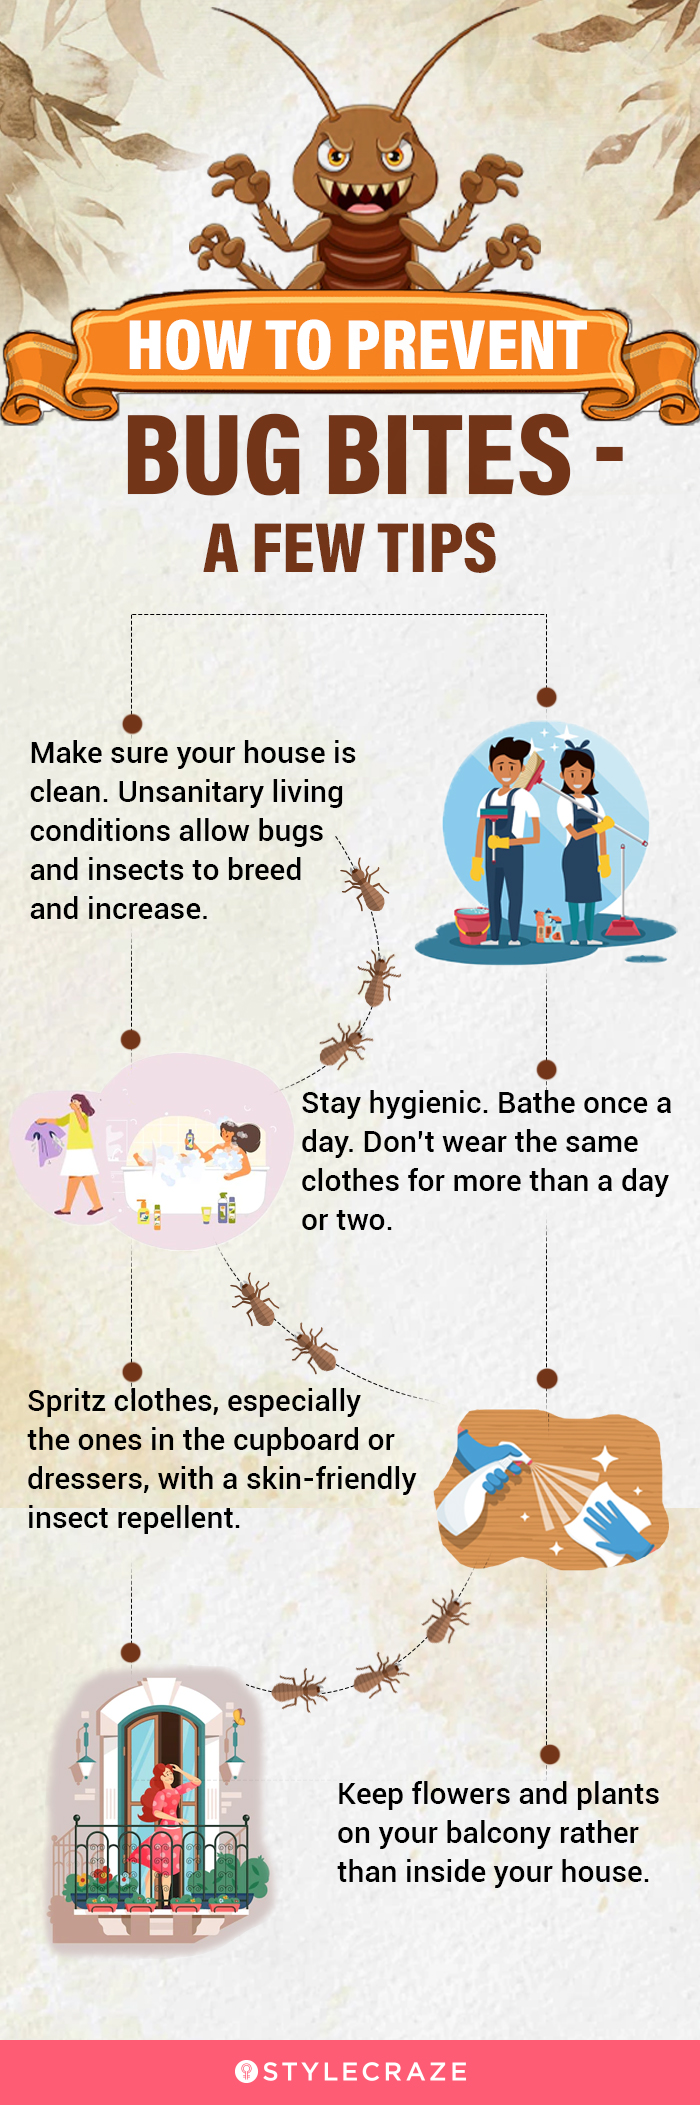 how to prevent bug bites a few tips (infographic)